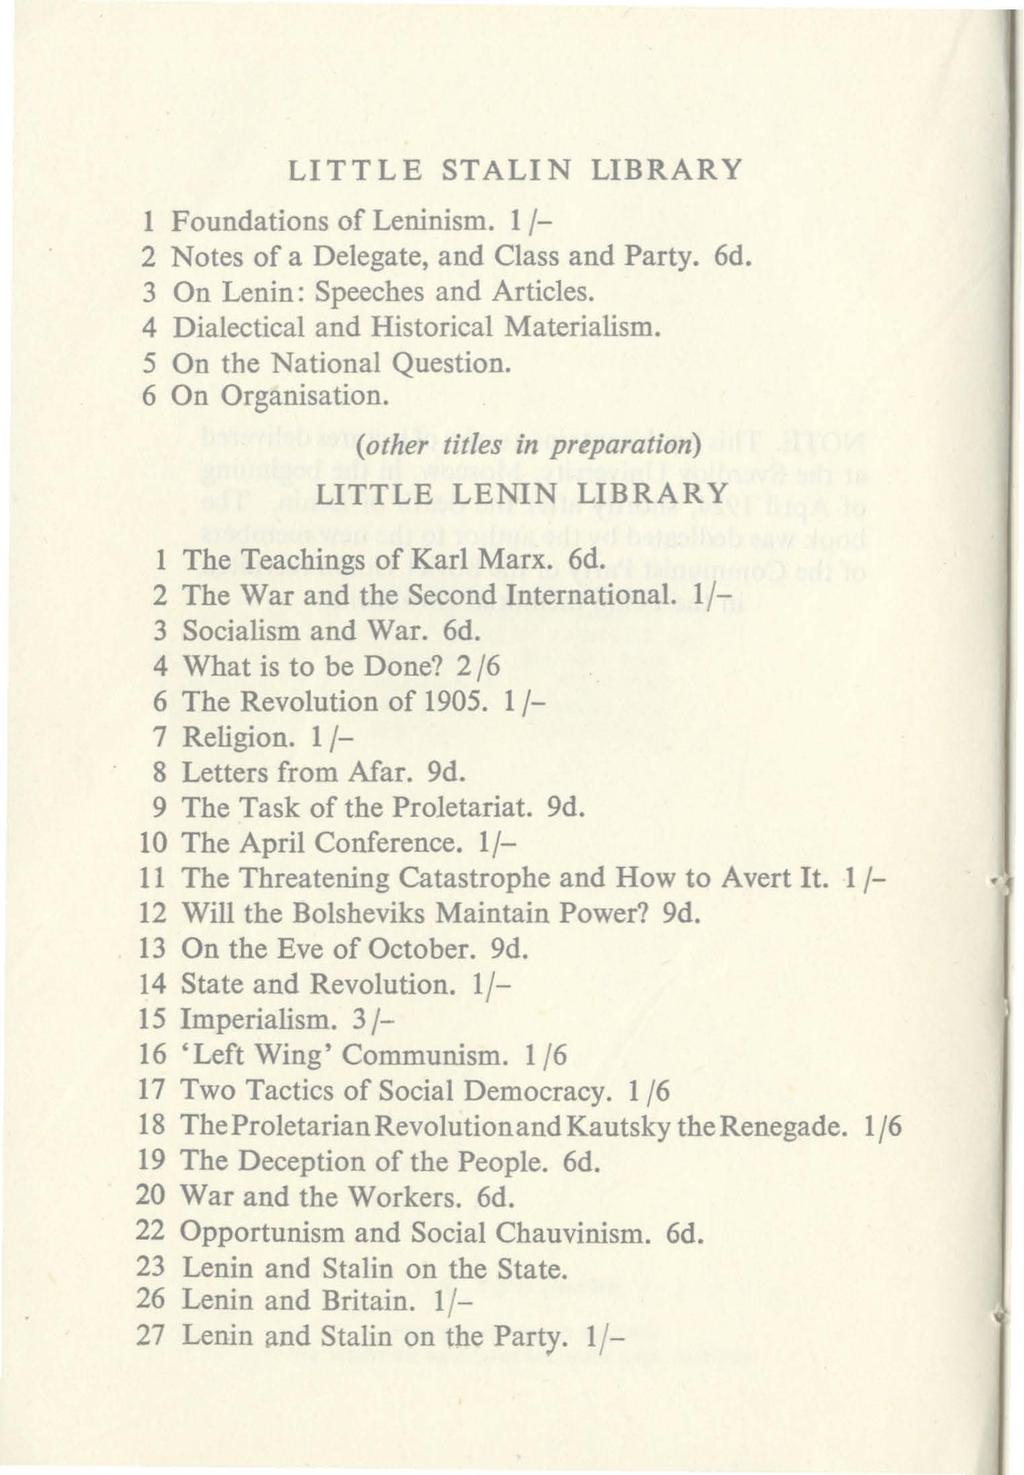 LITTLE STALIN LIBRARY 1 Foundations of Leninism. 11-2 Notes of a Delegate, and Class and Party. 6d. 3 On Lenin: Speeches and Articles. 4 Dialectical and Historical Materialism.